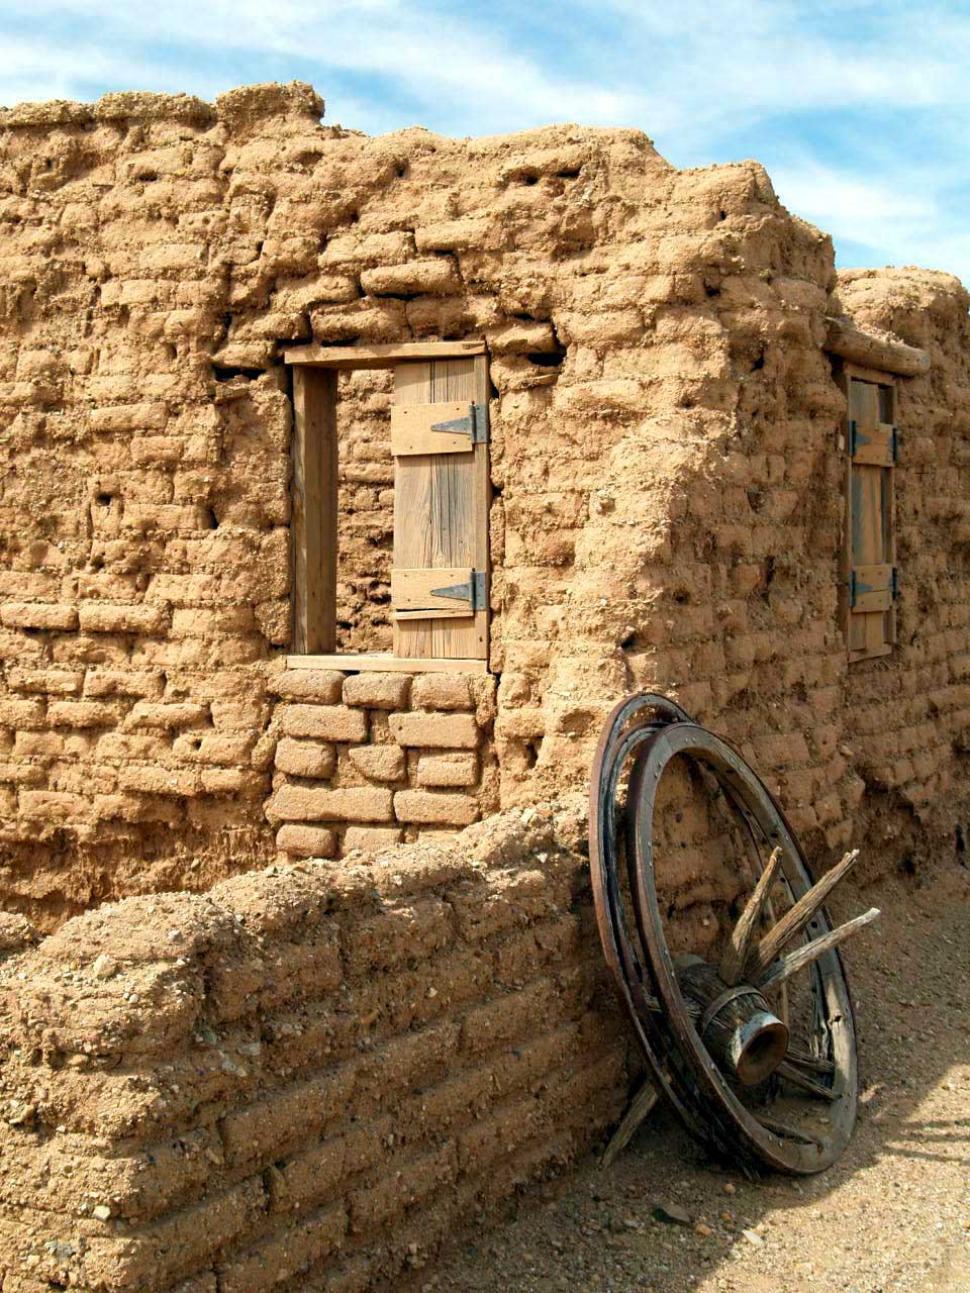 Free Image of Old Building With Leaning Wheel 